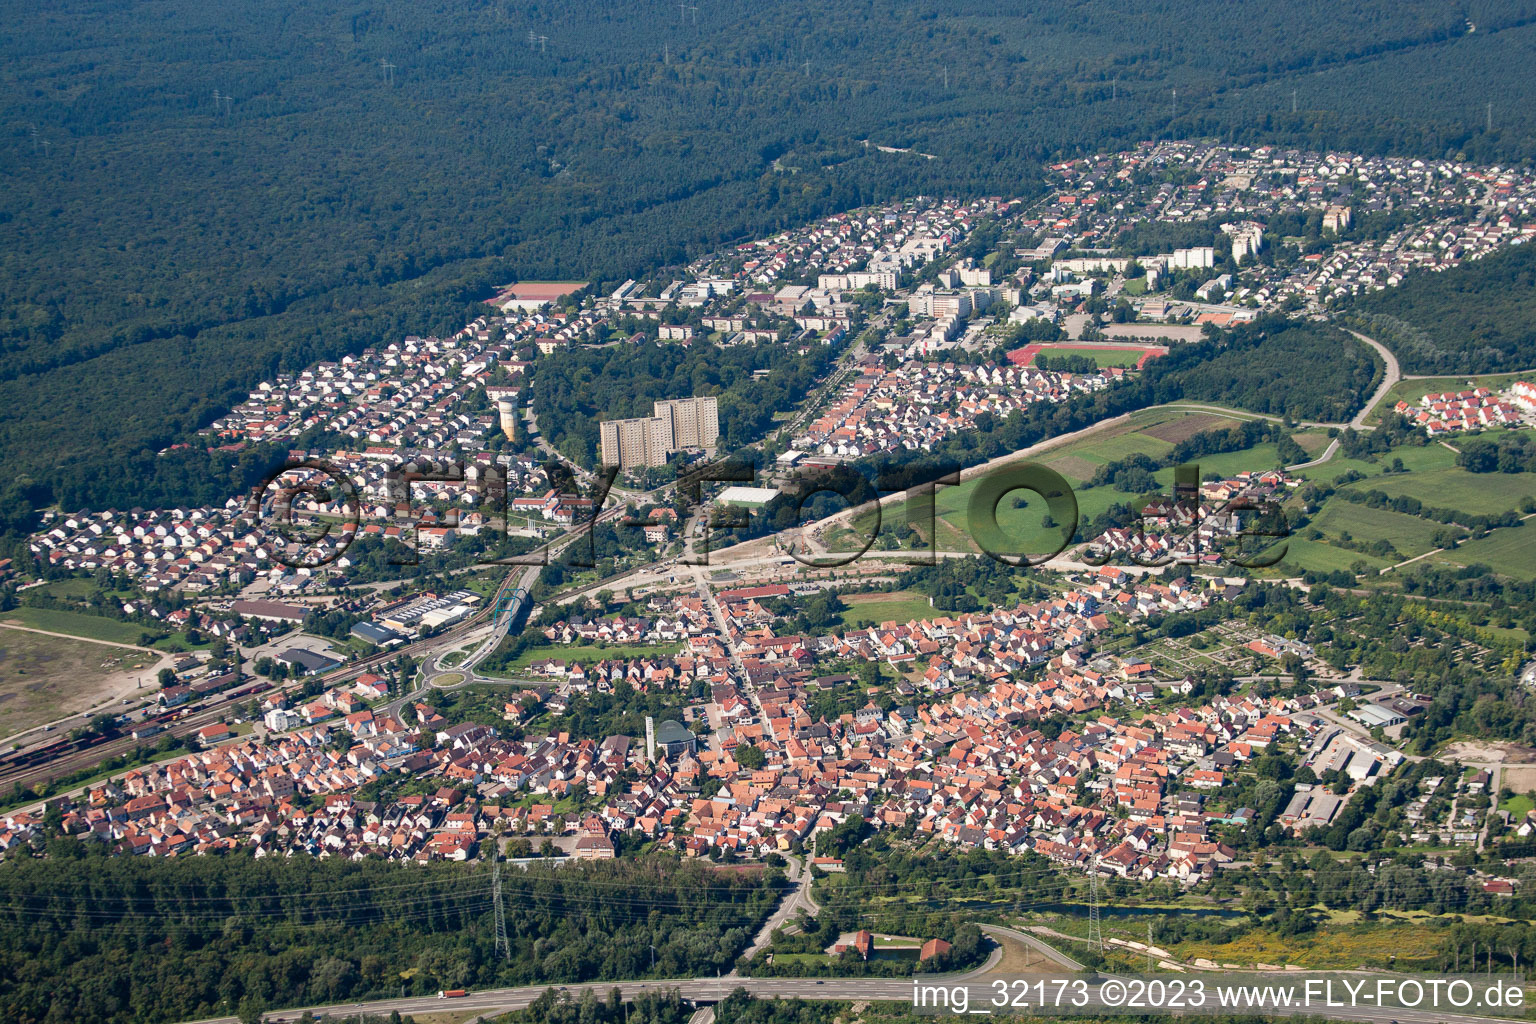 Aerial view of From the east in the district Maximiliansau in Wörth am Rhein in the state Rhineland-Palatinate, Germany